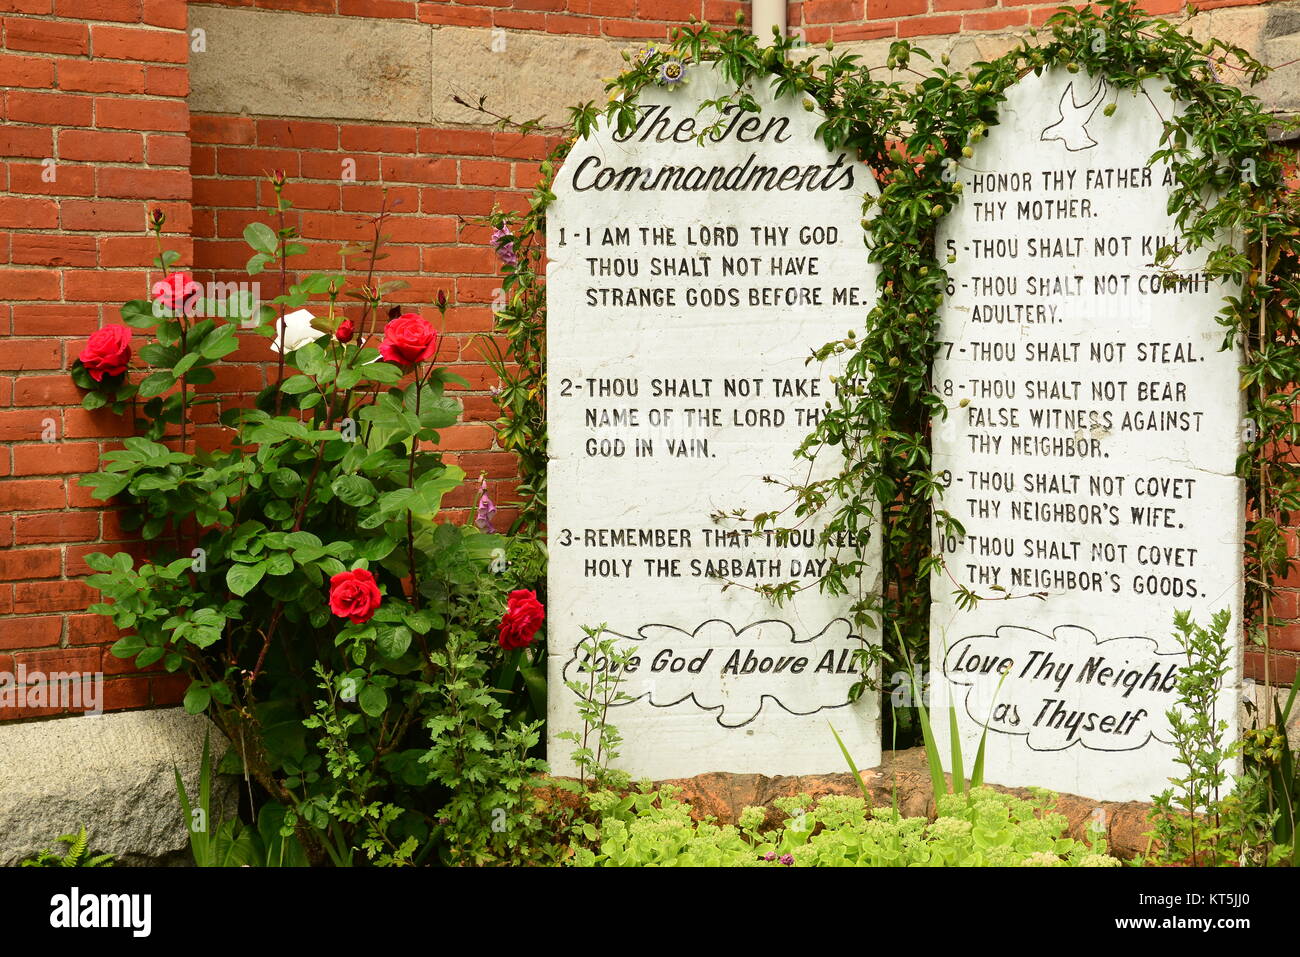 The Ten Commandments of the Catholic church, rules and regulations. Stock Photo